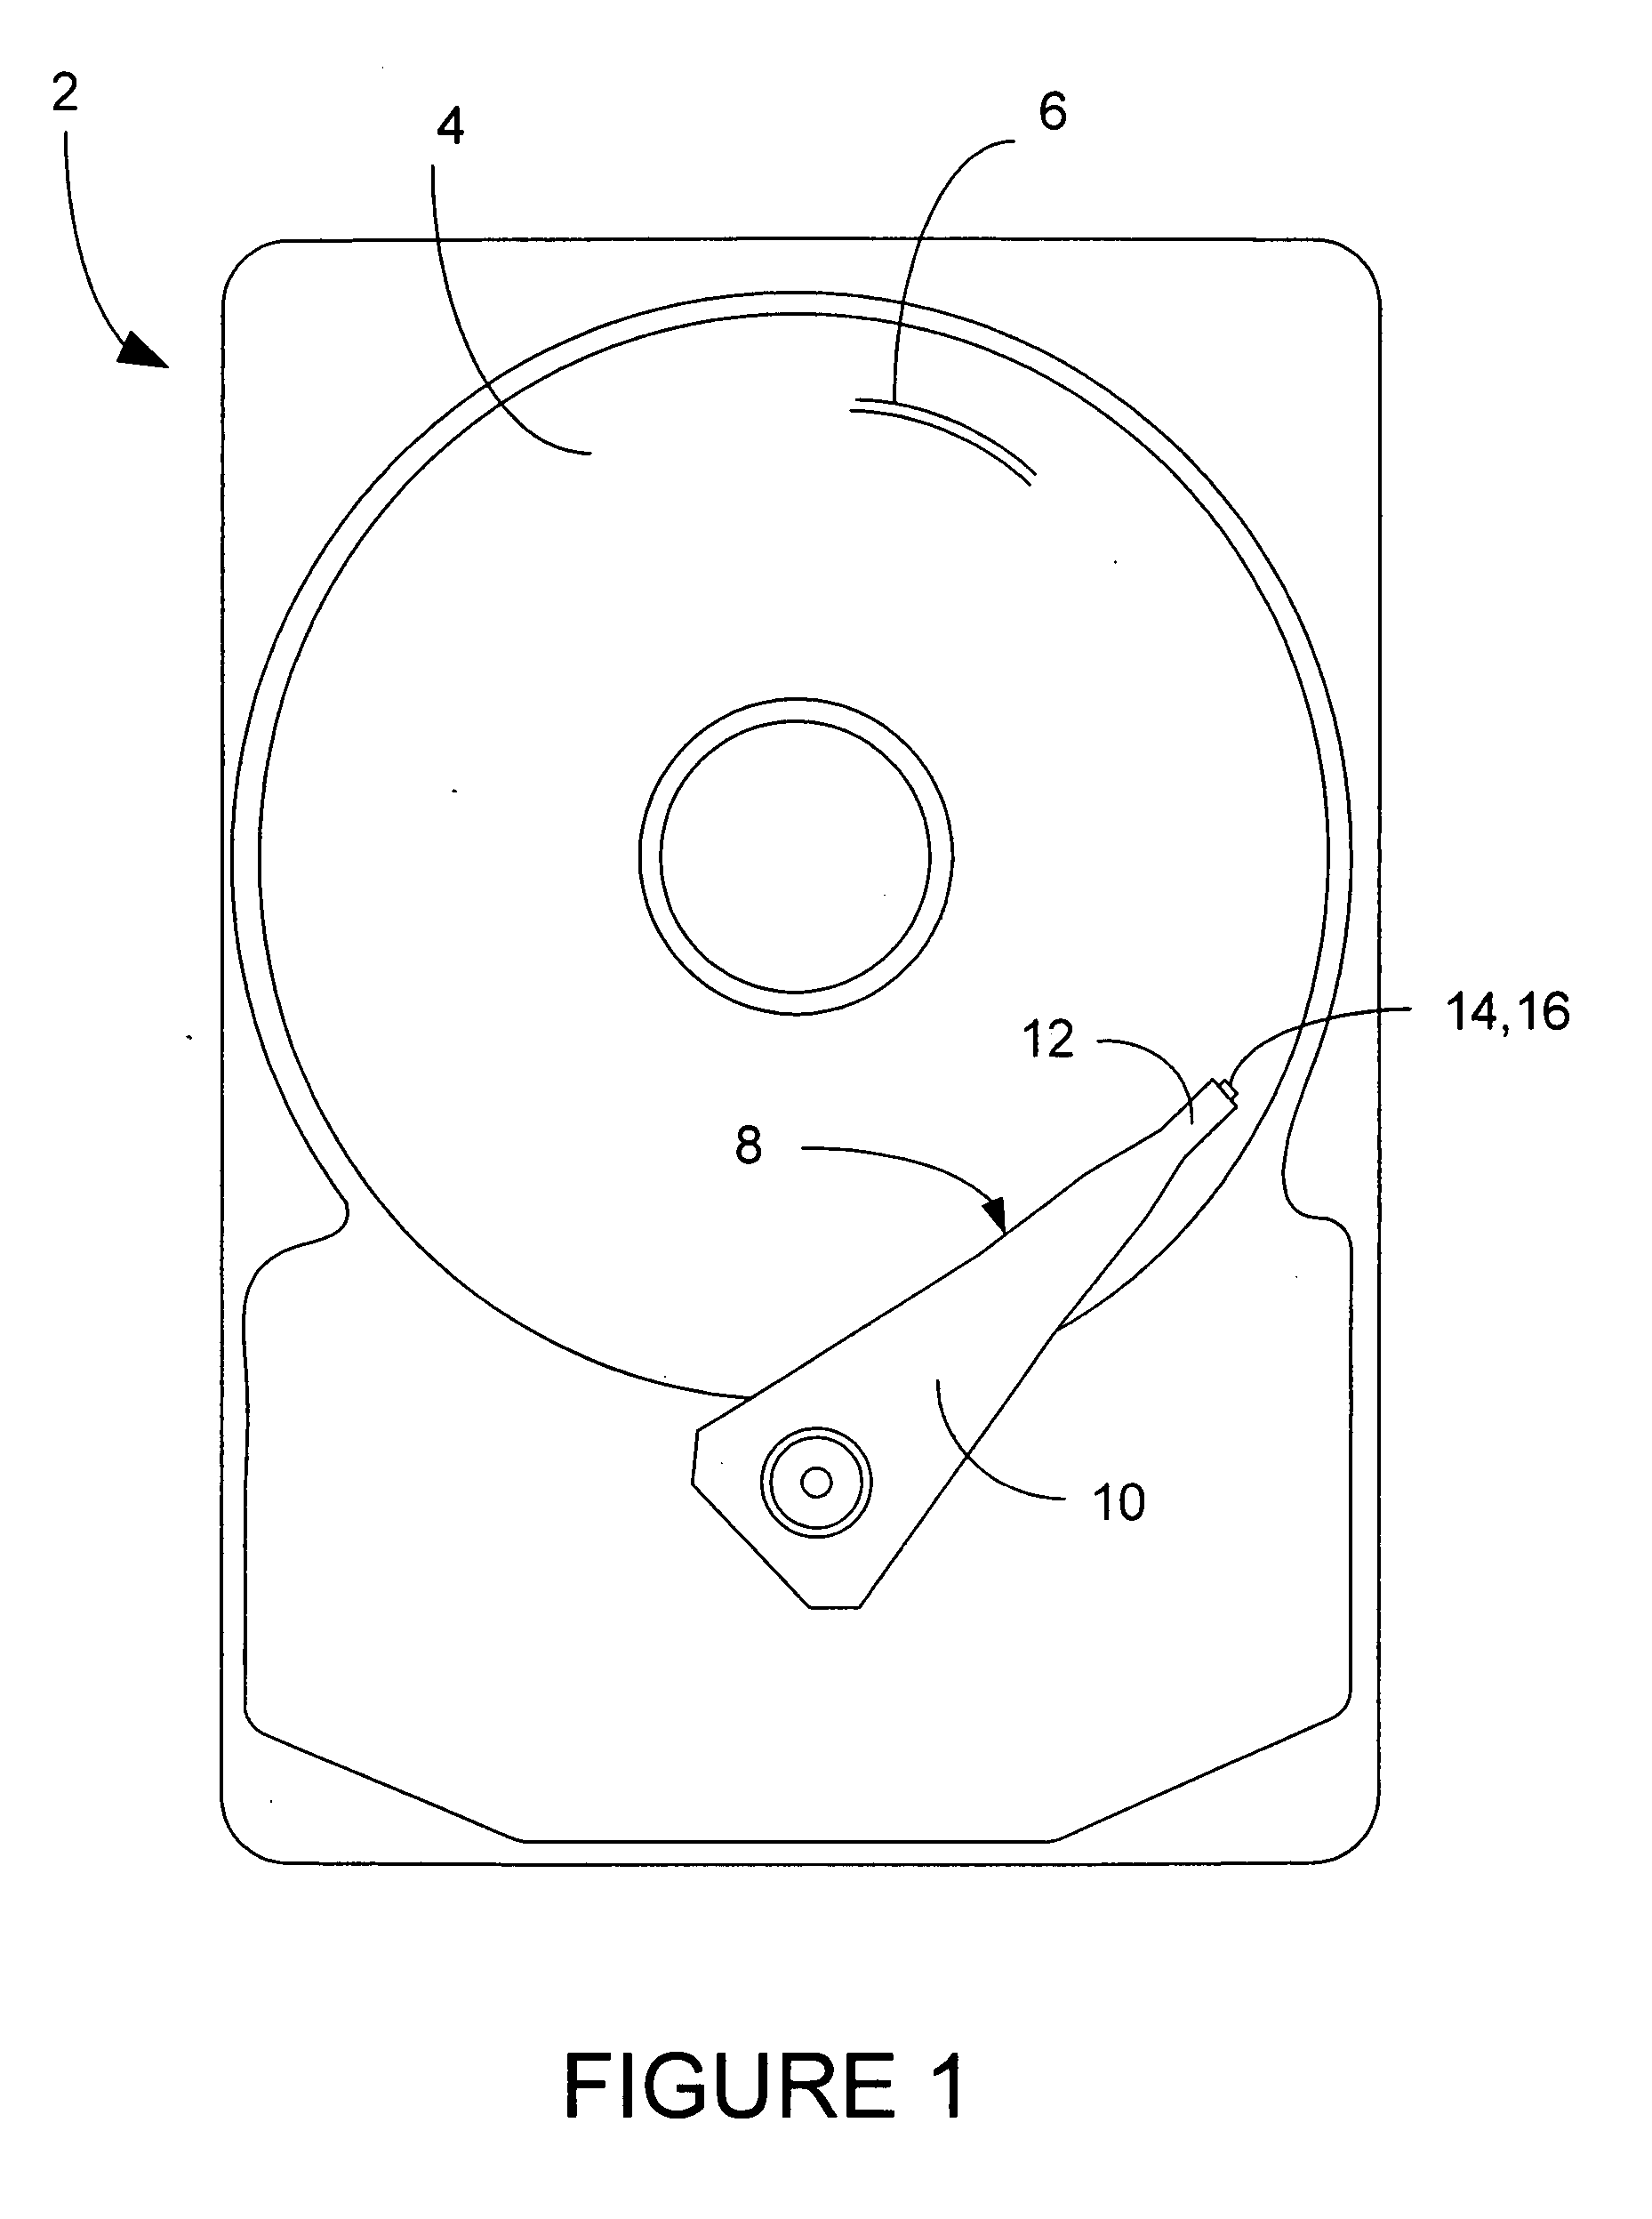 Method to reduce corner shunting during fabrication of CPP read heads